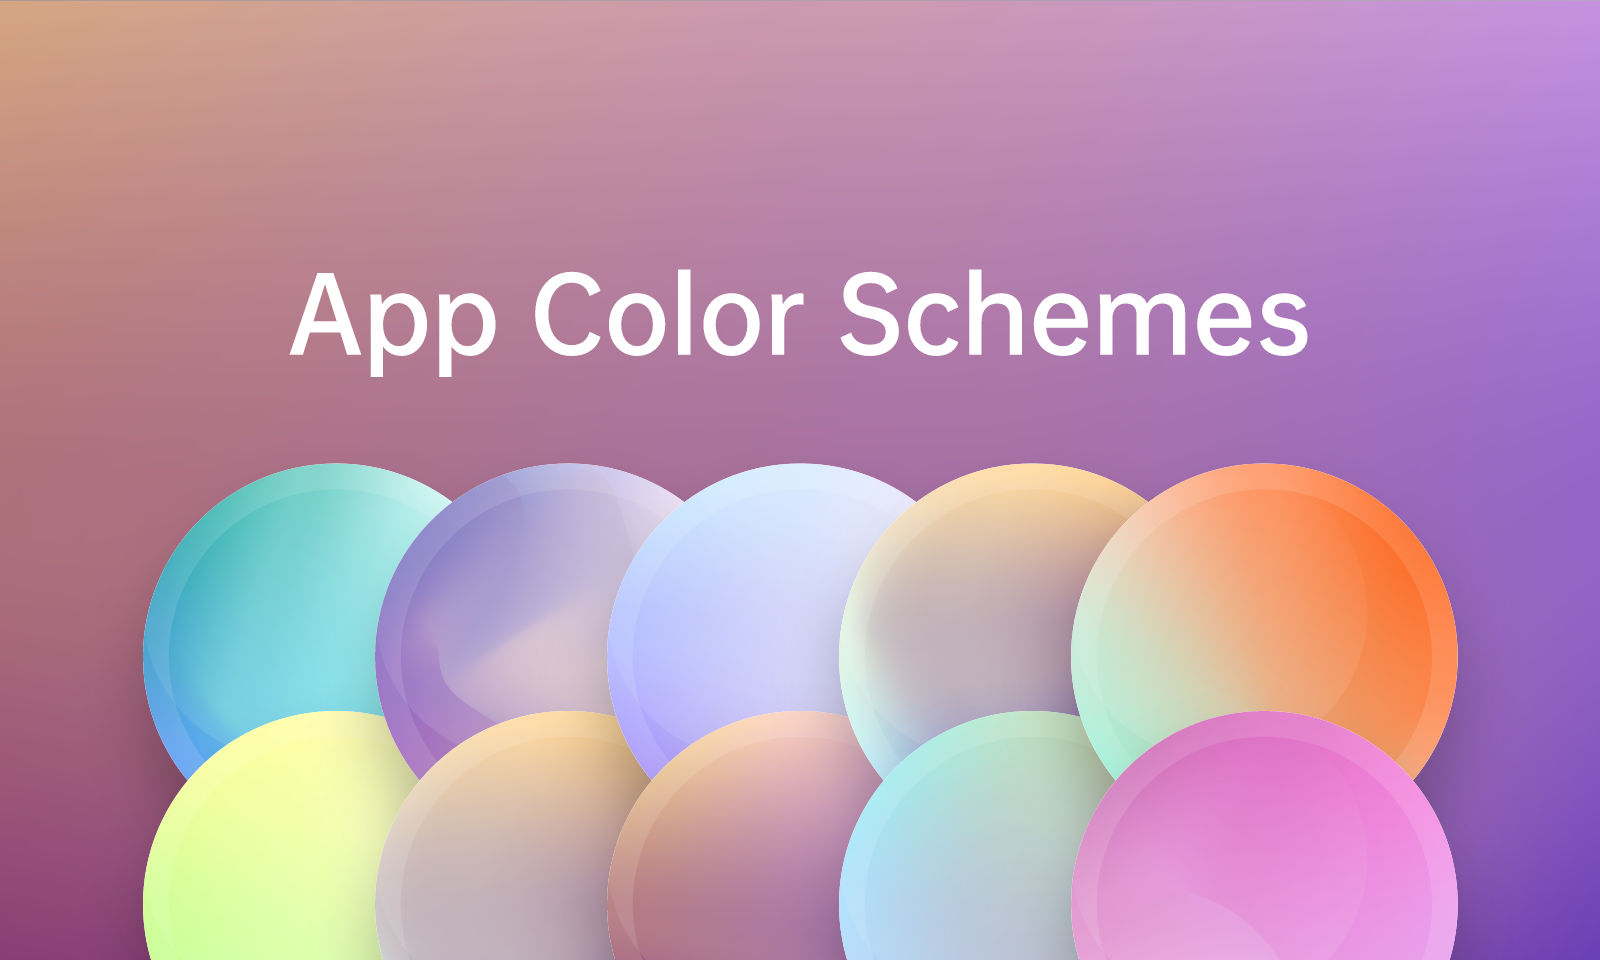  How to Get the Perfect App Color Schemes